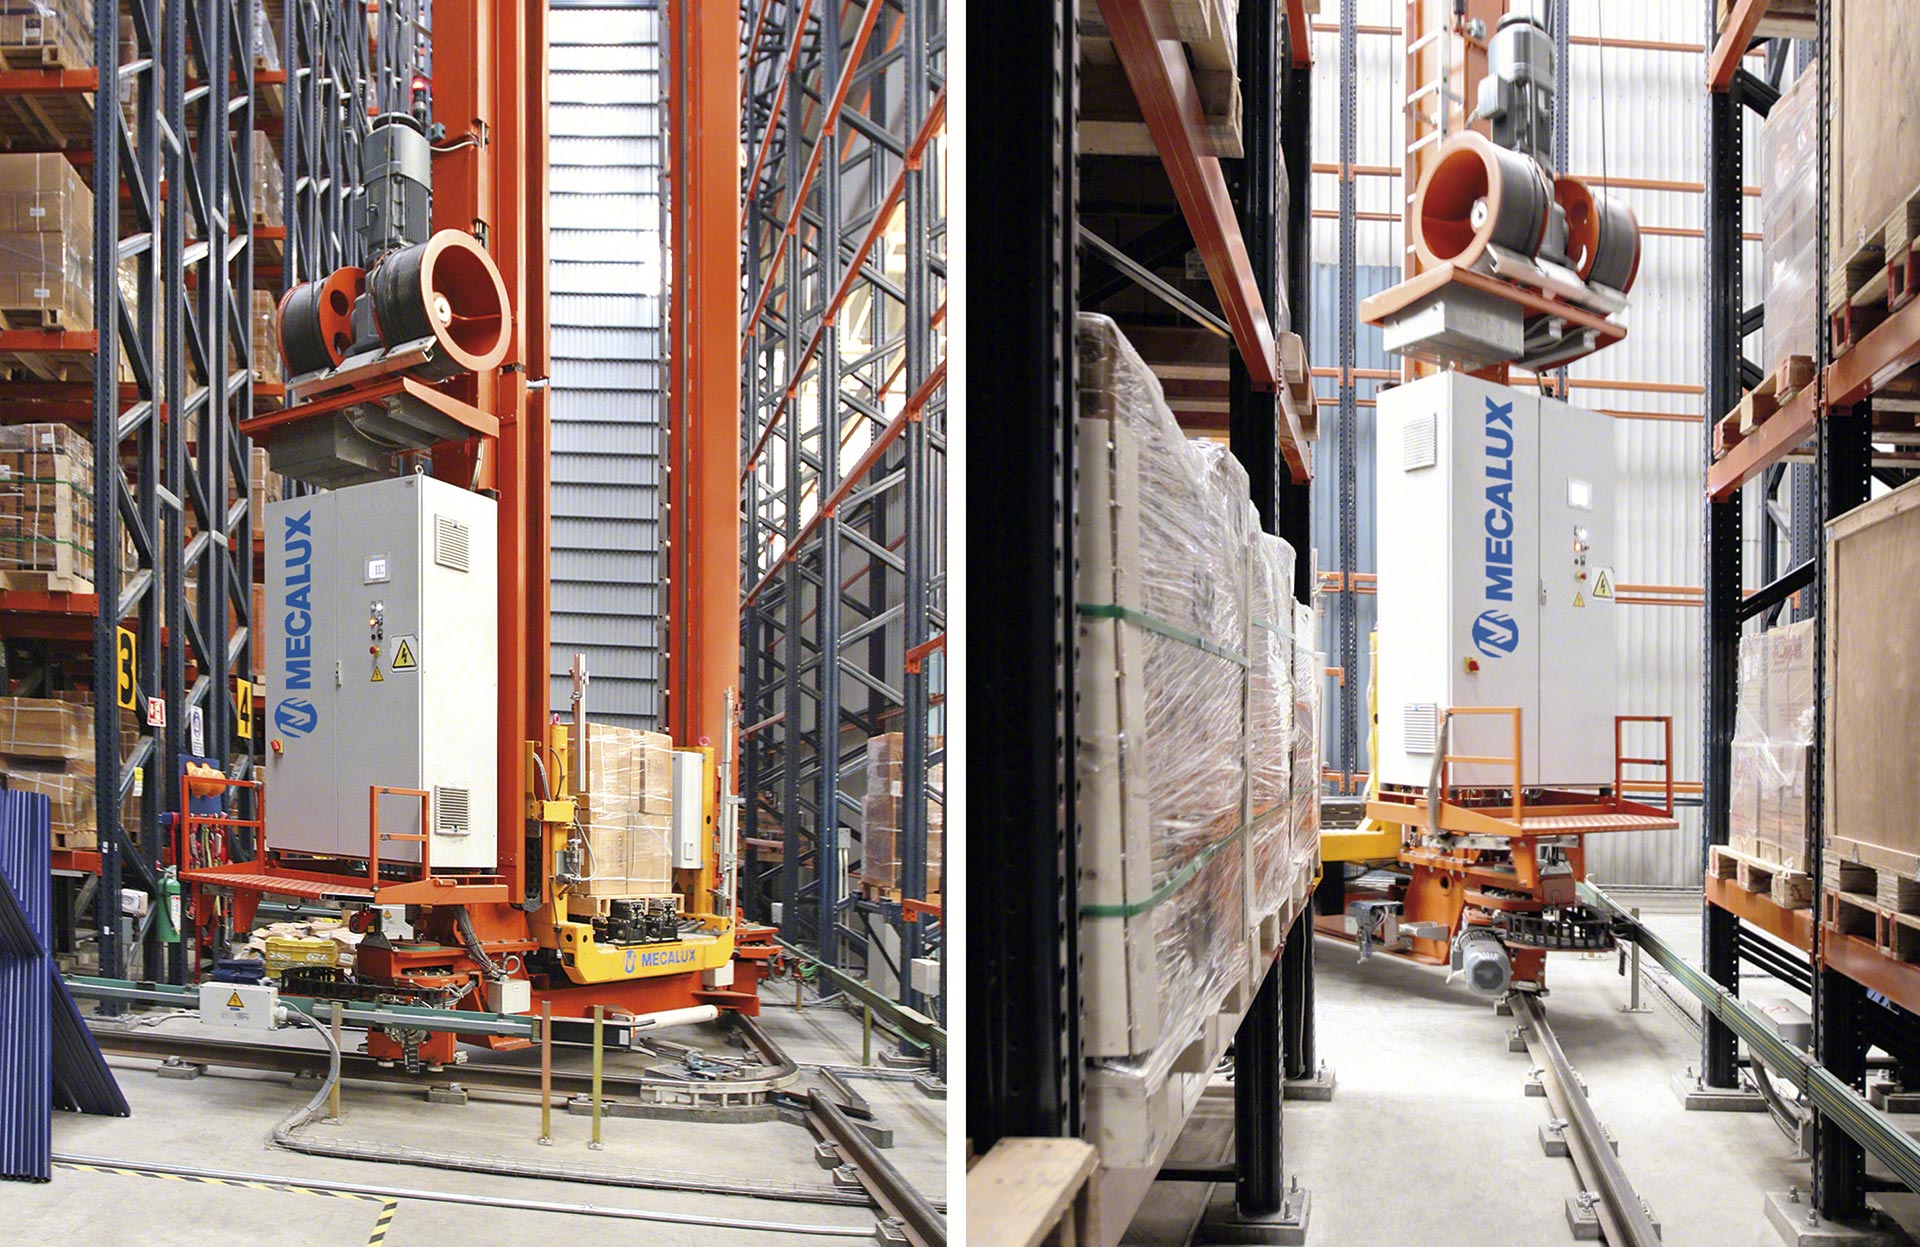 A stacker crane can work in more than one aisle thanks to aisle-changing systems such as curved tracks